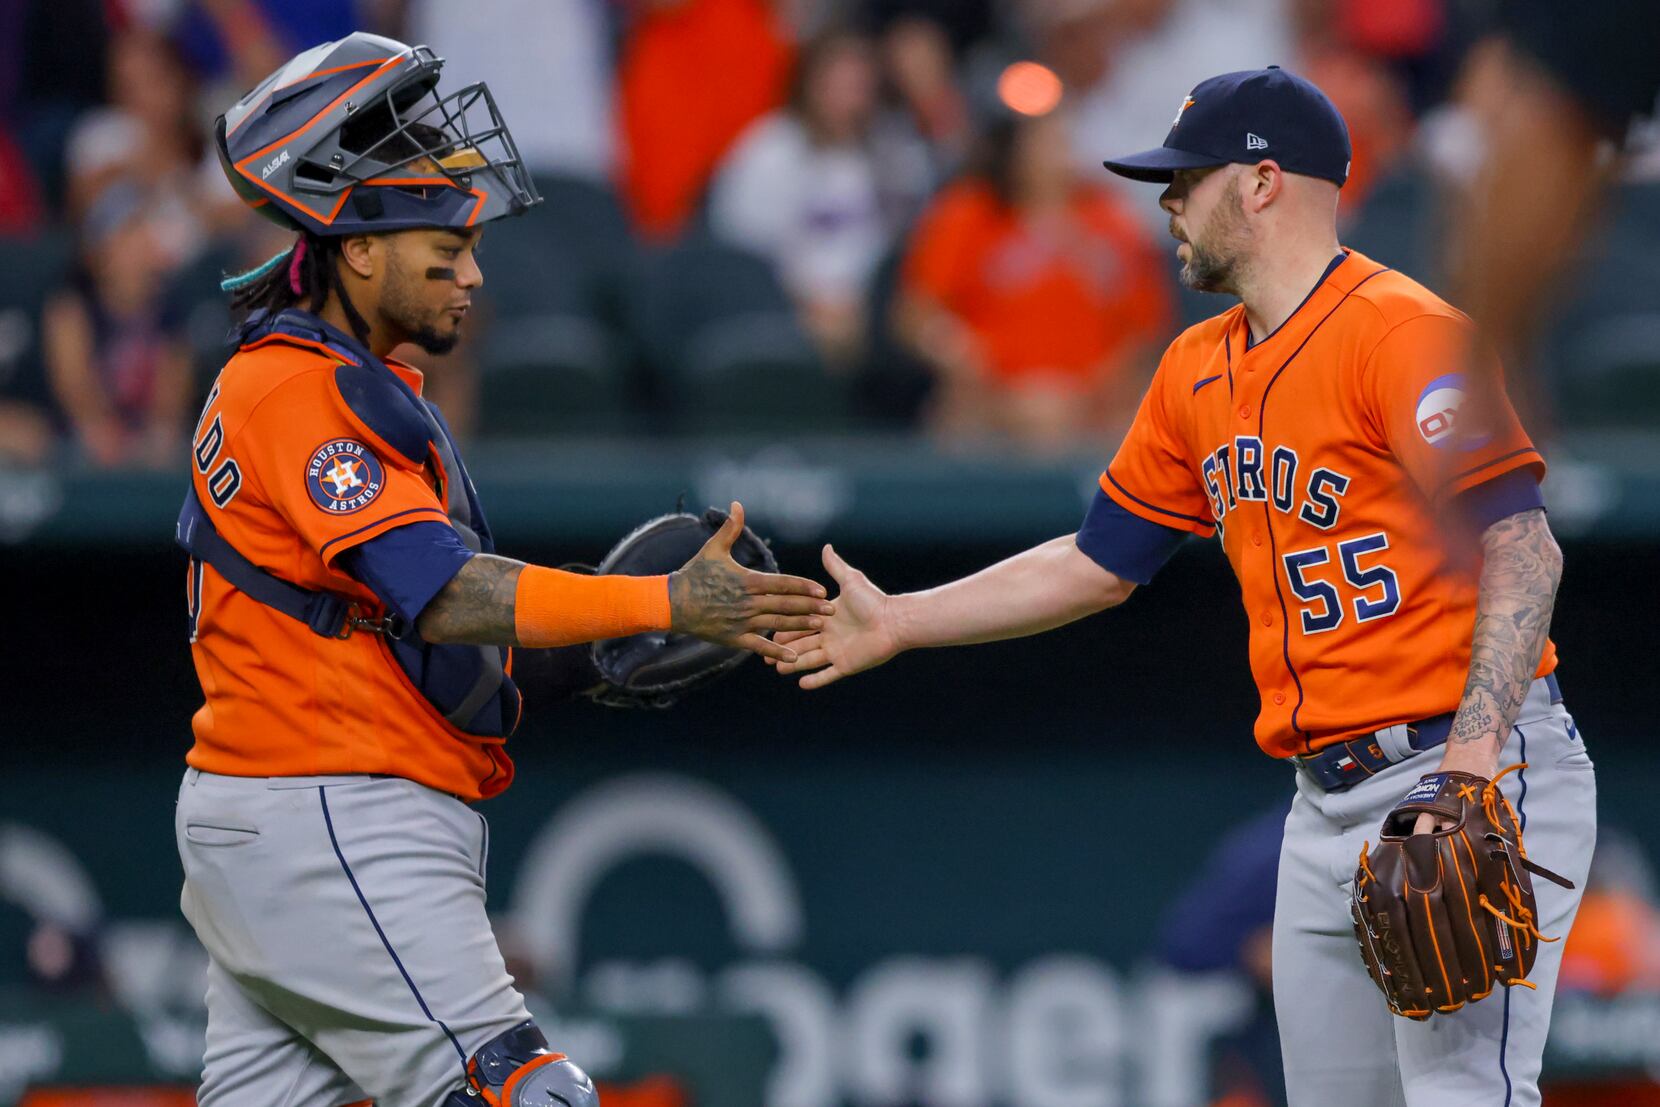 Jose Altuve Clutch Hitting Helps The Astros Tie The World Series